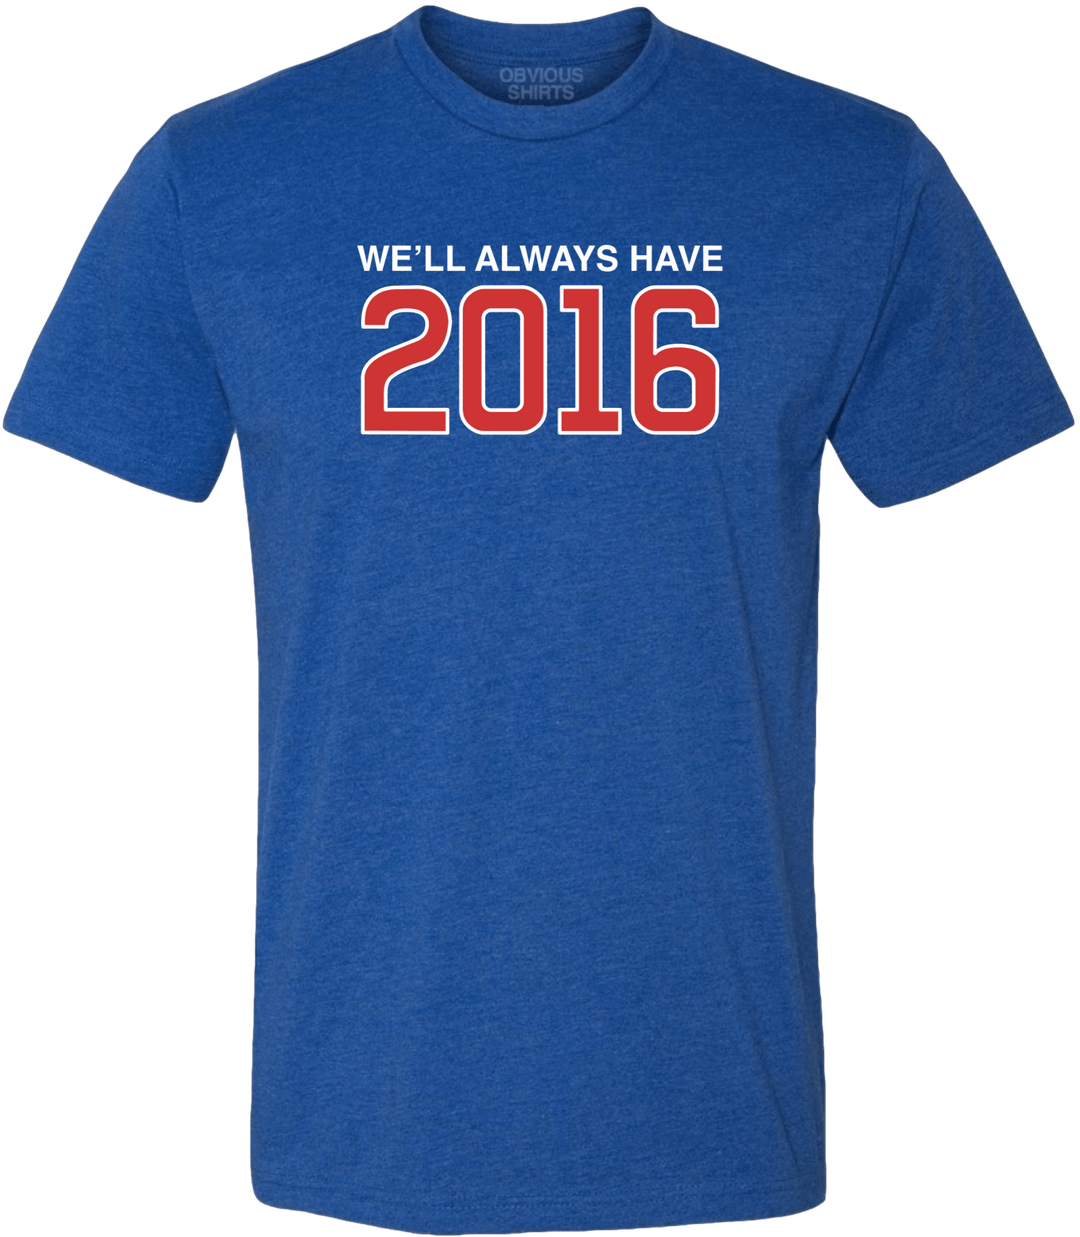 I Hate The Yankees - New York Mets Shirt - Text Ver - Beef Shirts